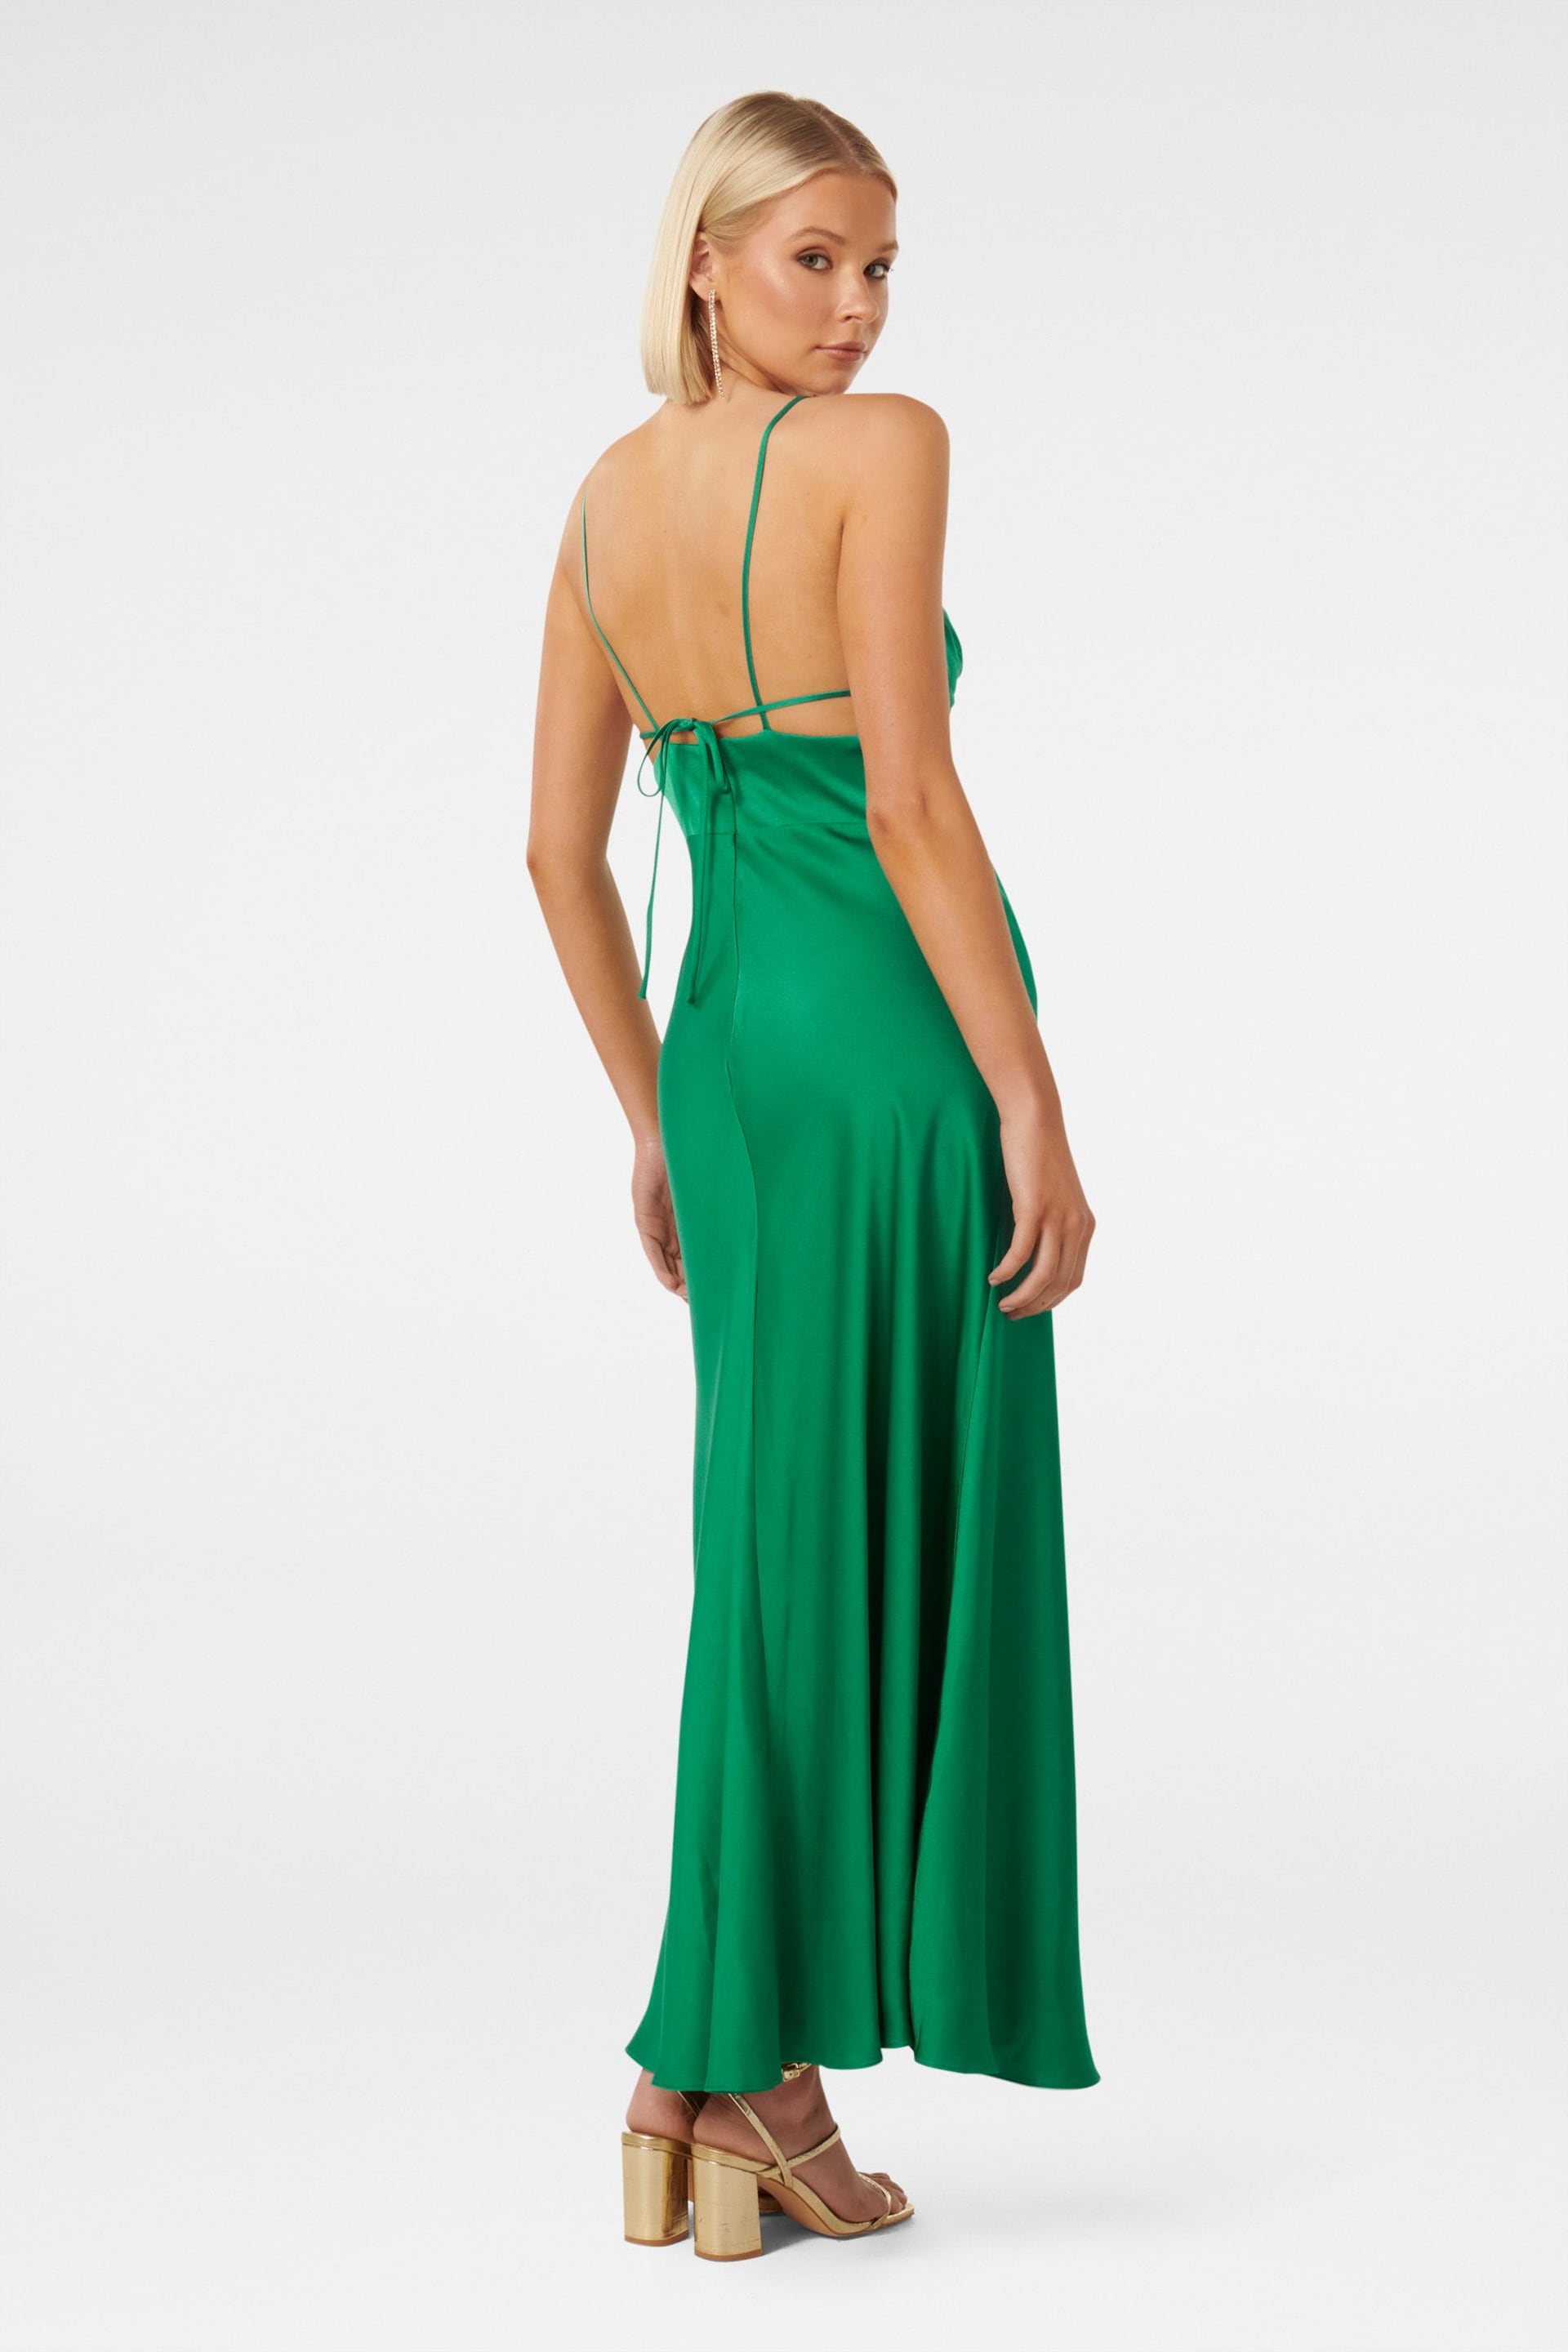 Forever New Green Cassia Satin Cutout Midi Dress - Image 4 of 4